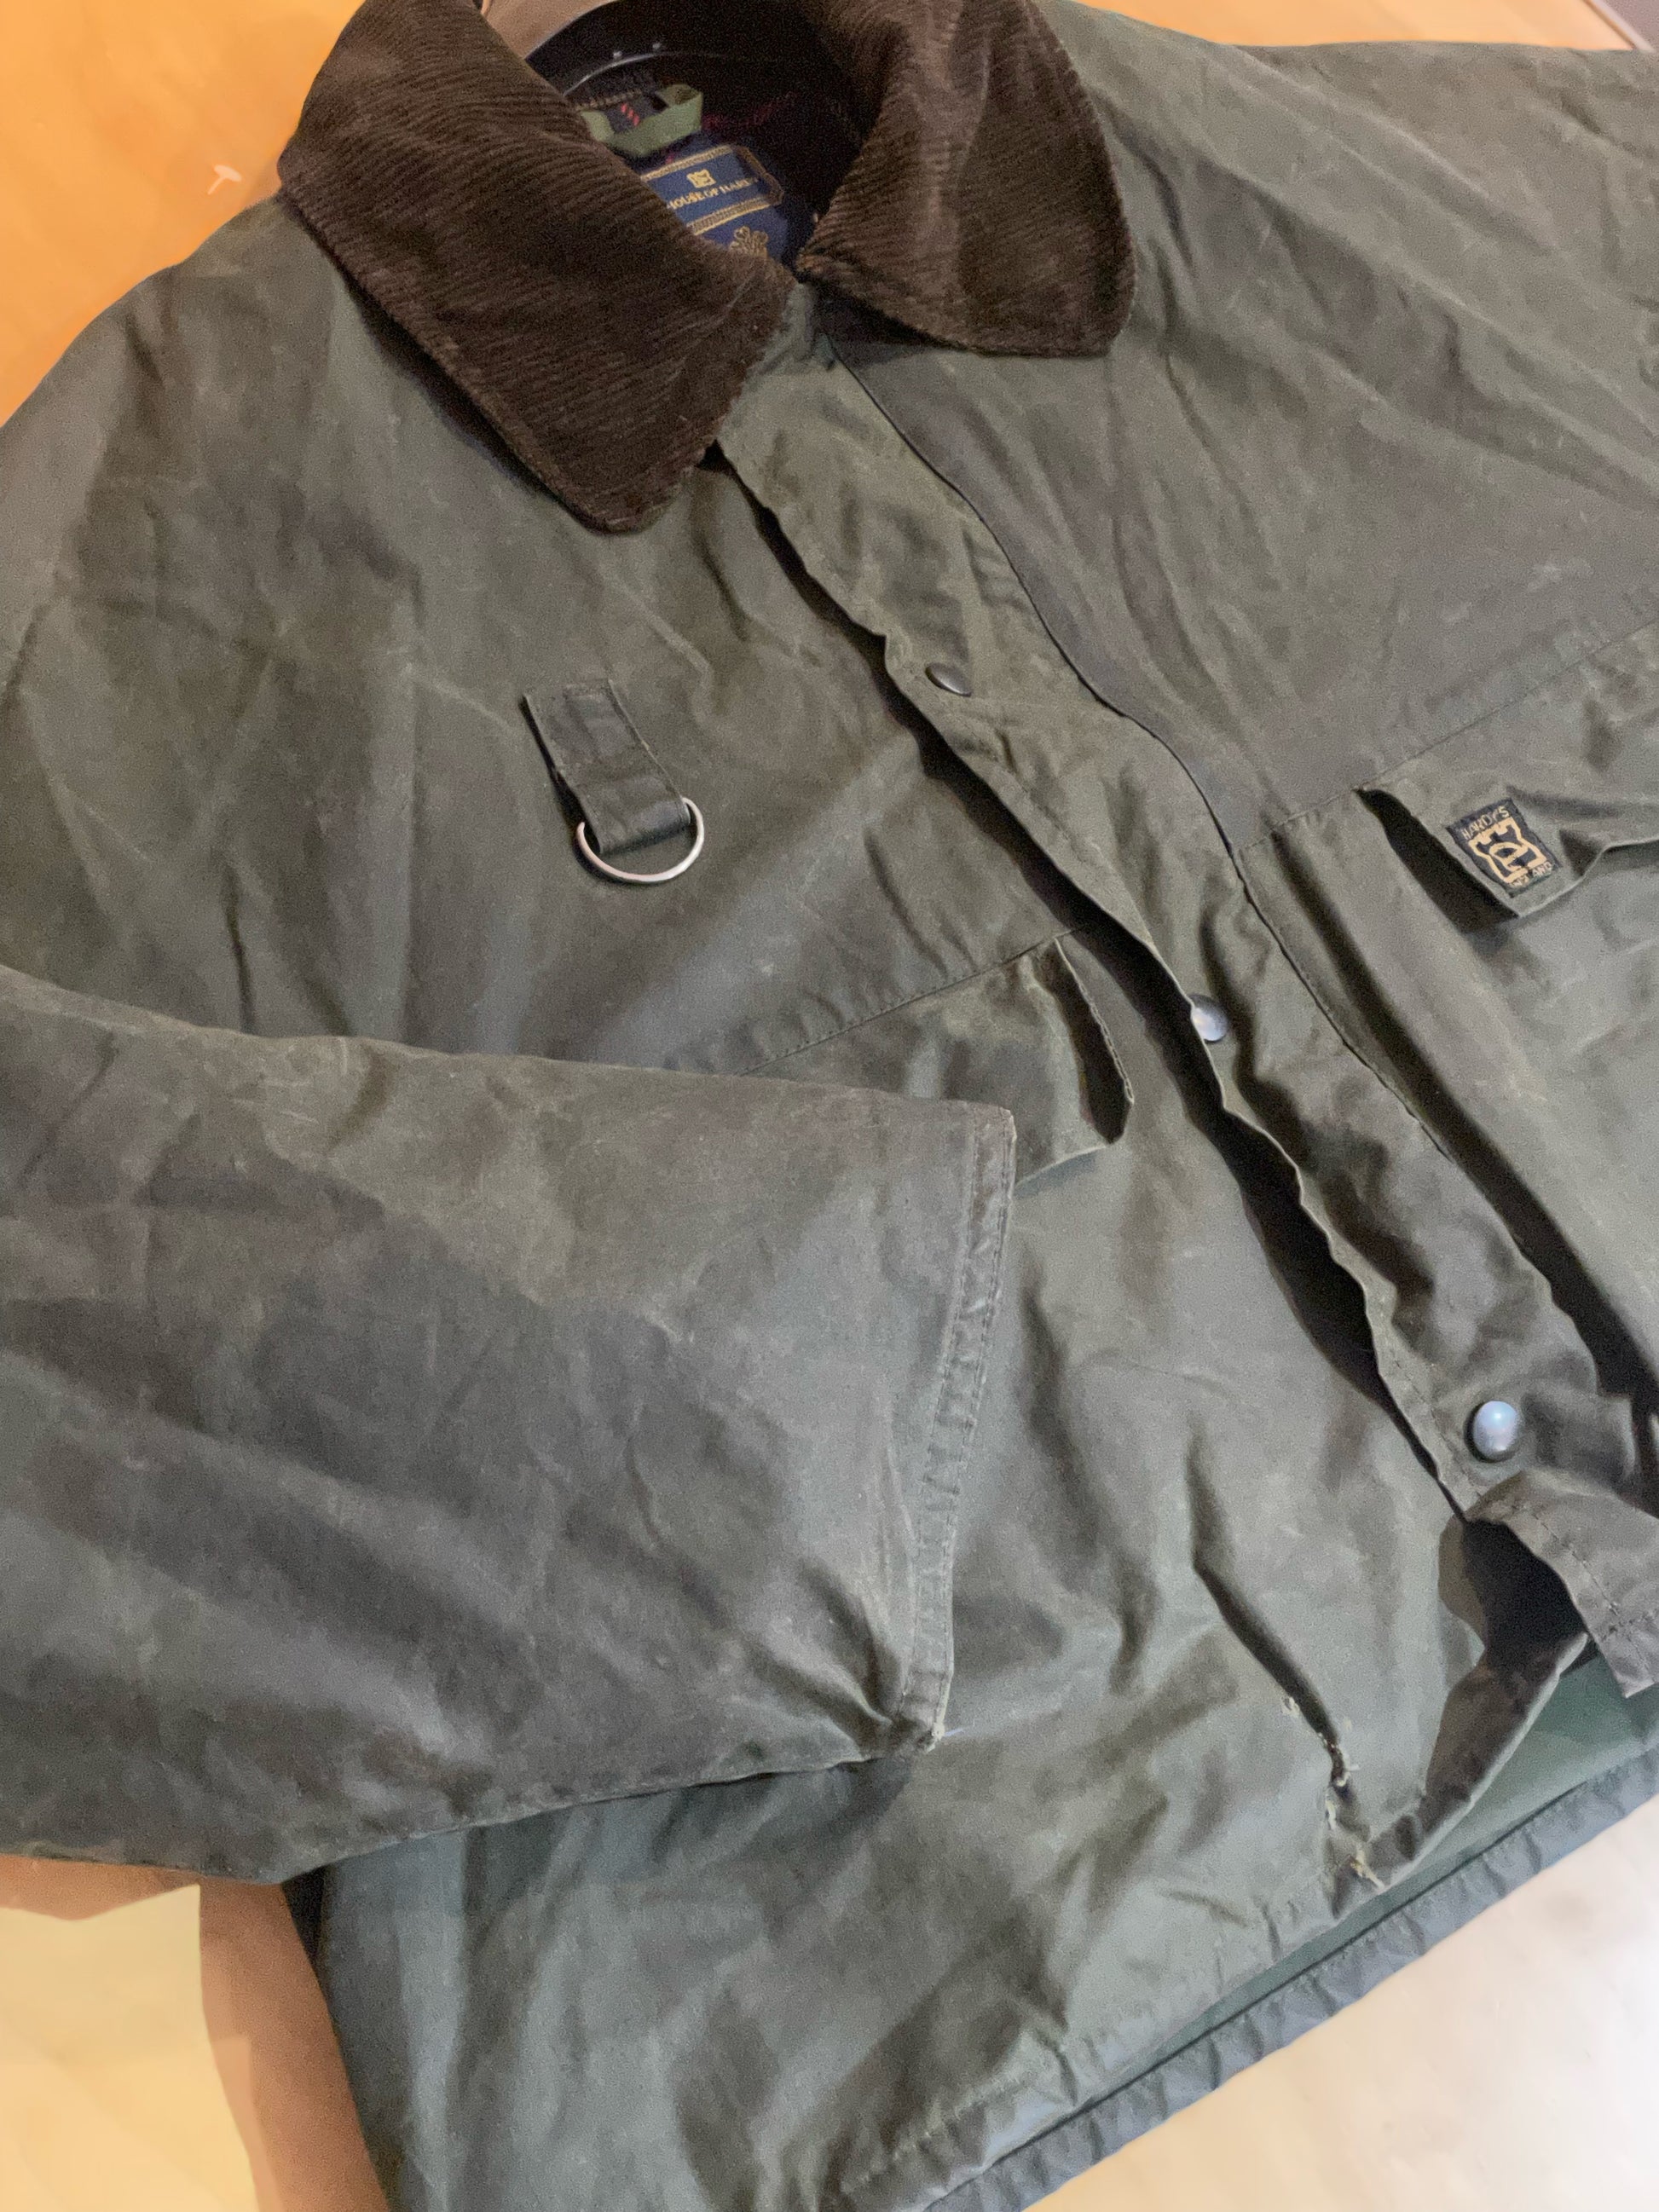 VINTAGE 80s HOUSE OF HARDY HARDY'S FLY-FISHING WAXED JACKET SZ: L